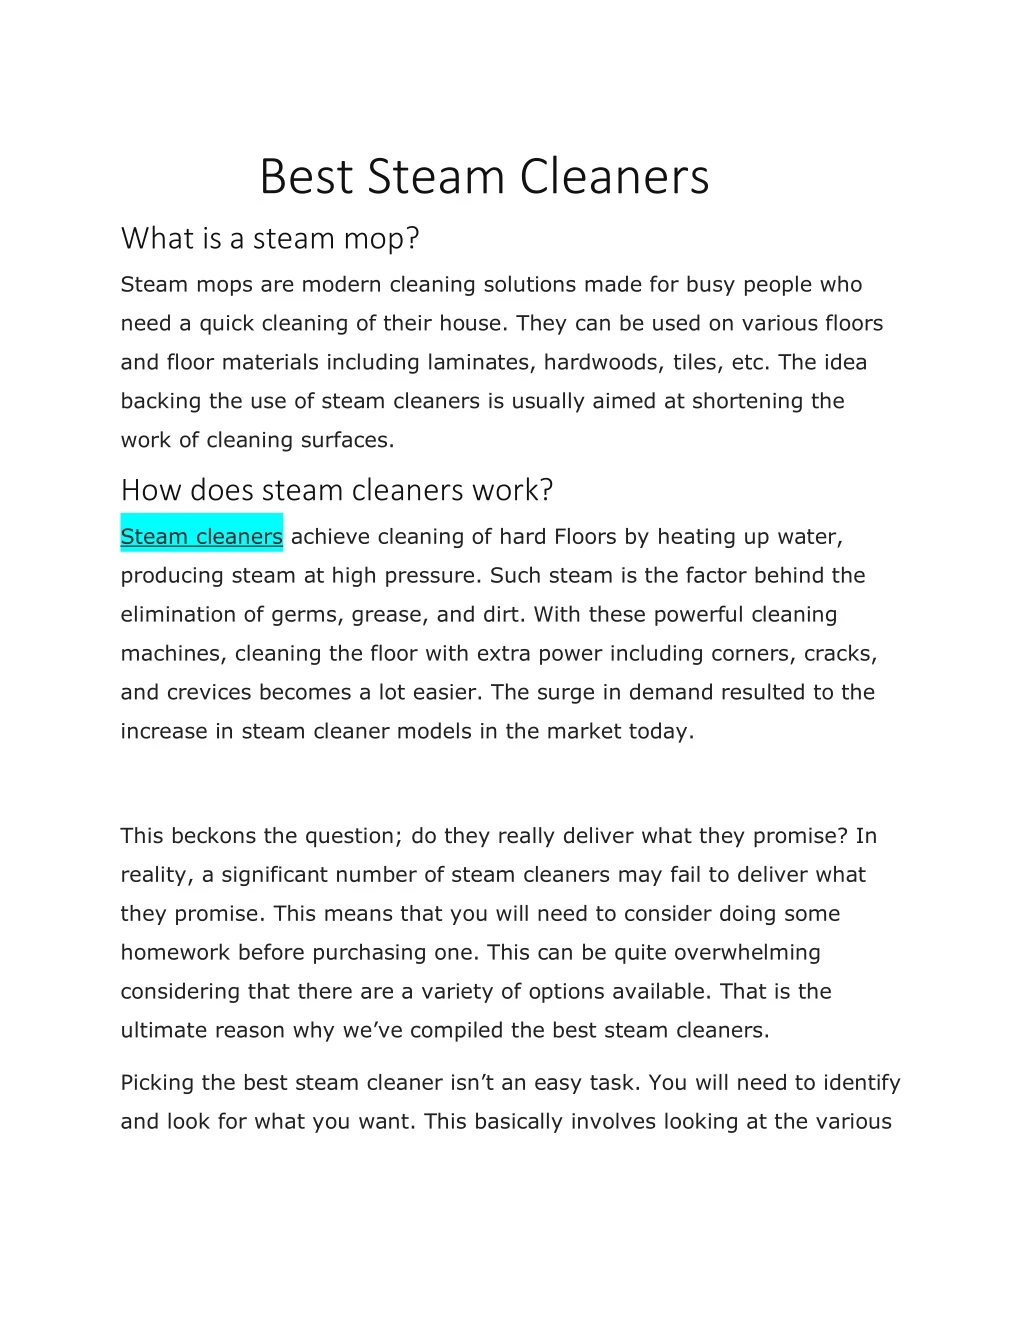 best steam cleaners what is a steam mop